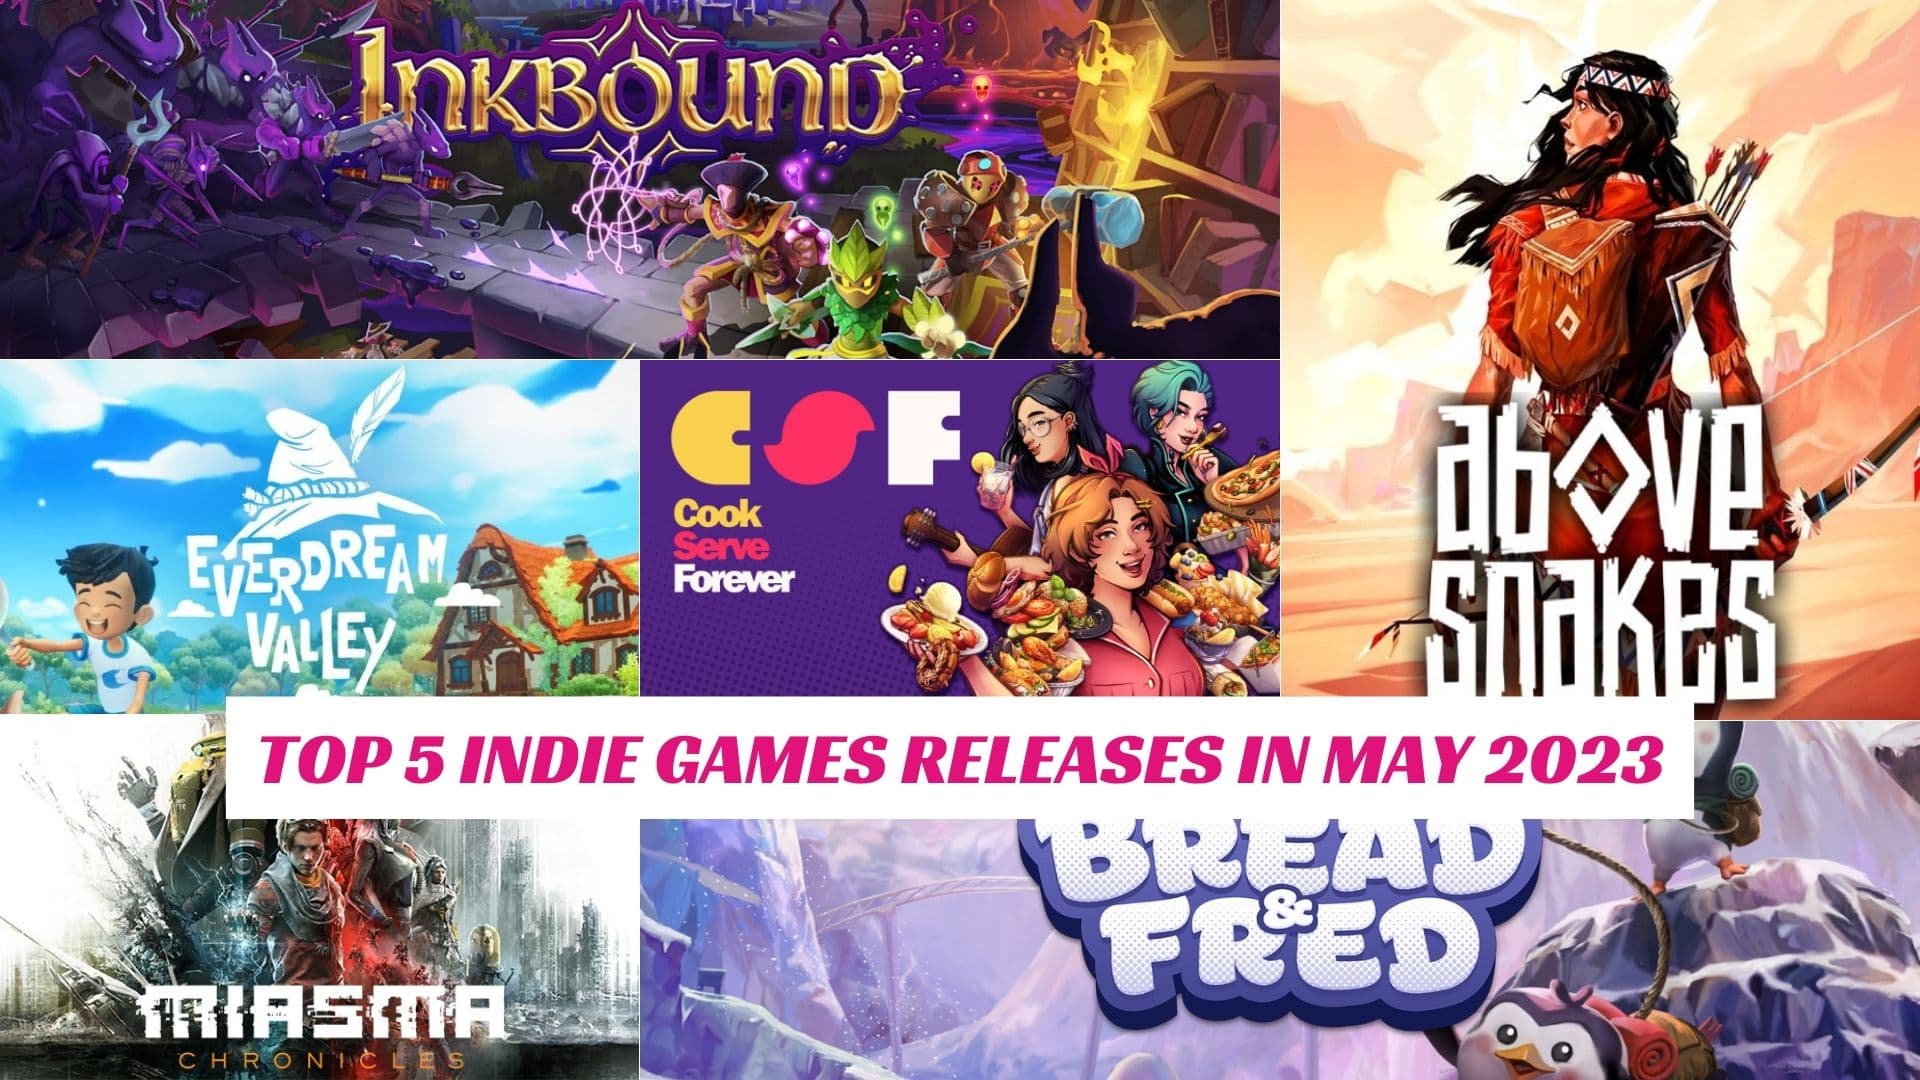 Top 6 Indie Game Releases In May 2023